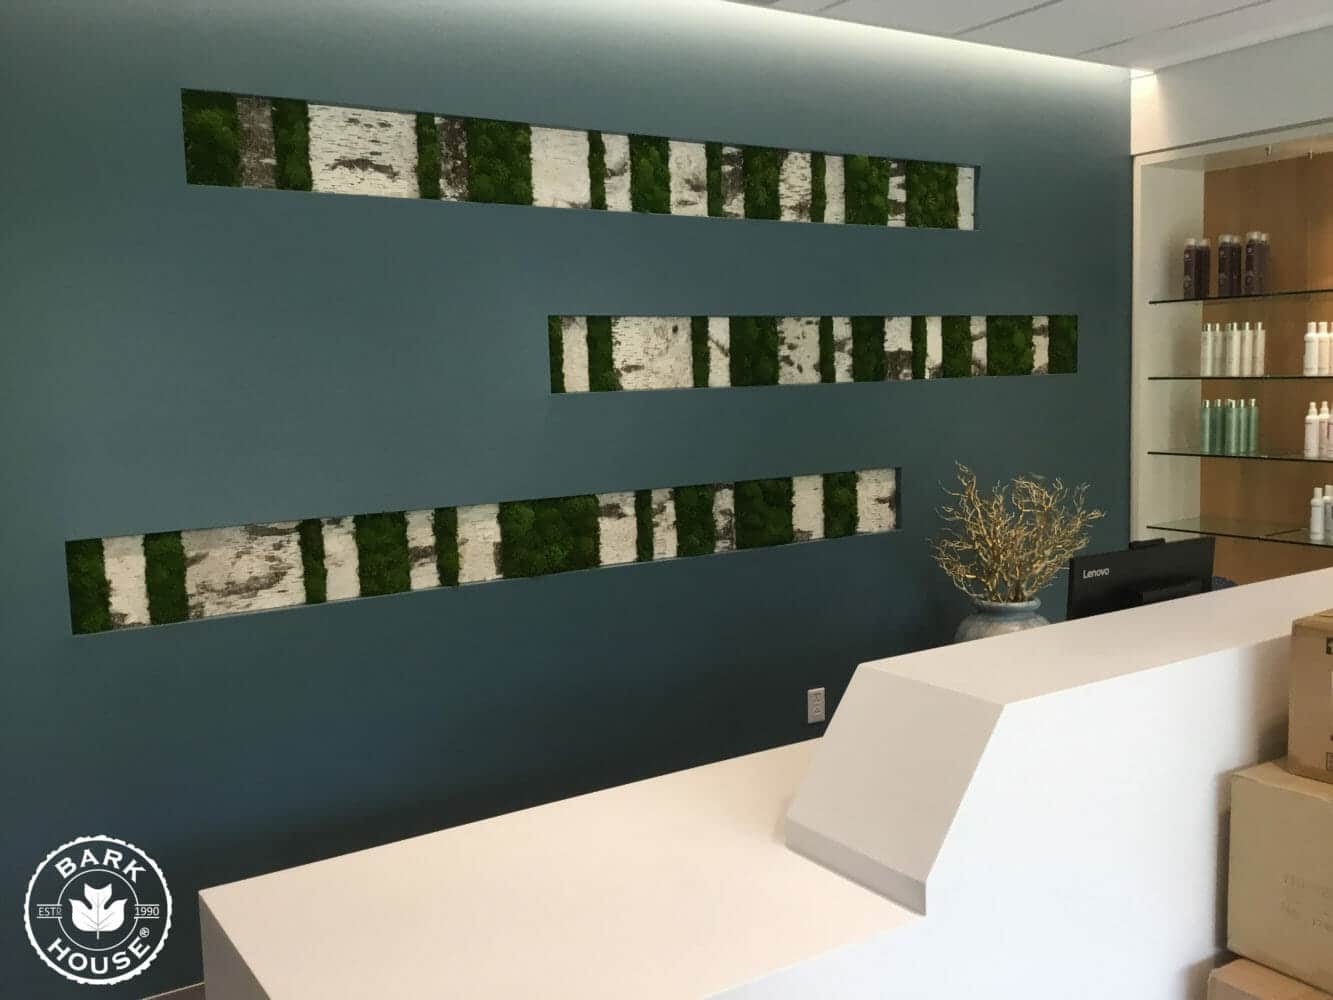 Bark House White Birch Bark Wall Covering Panels with Moss in Cancer Hospital